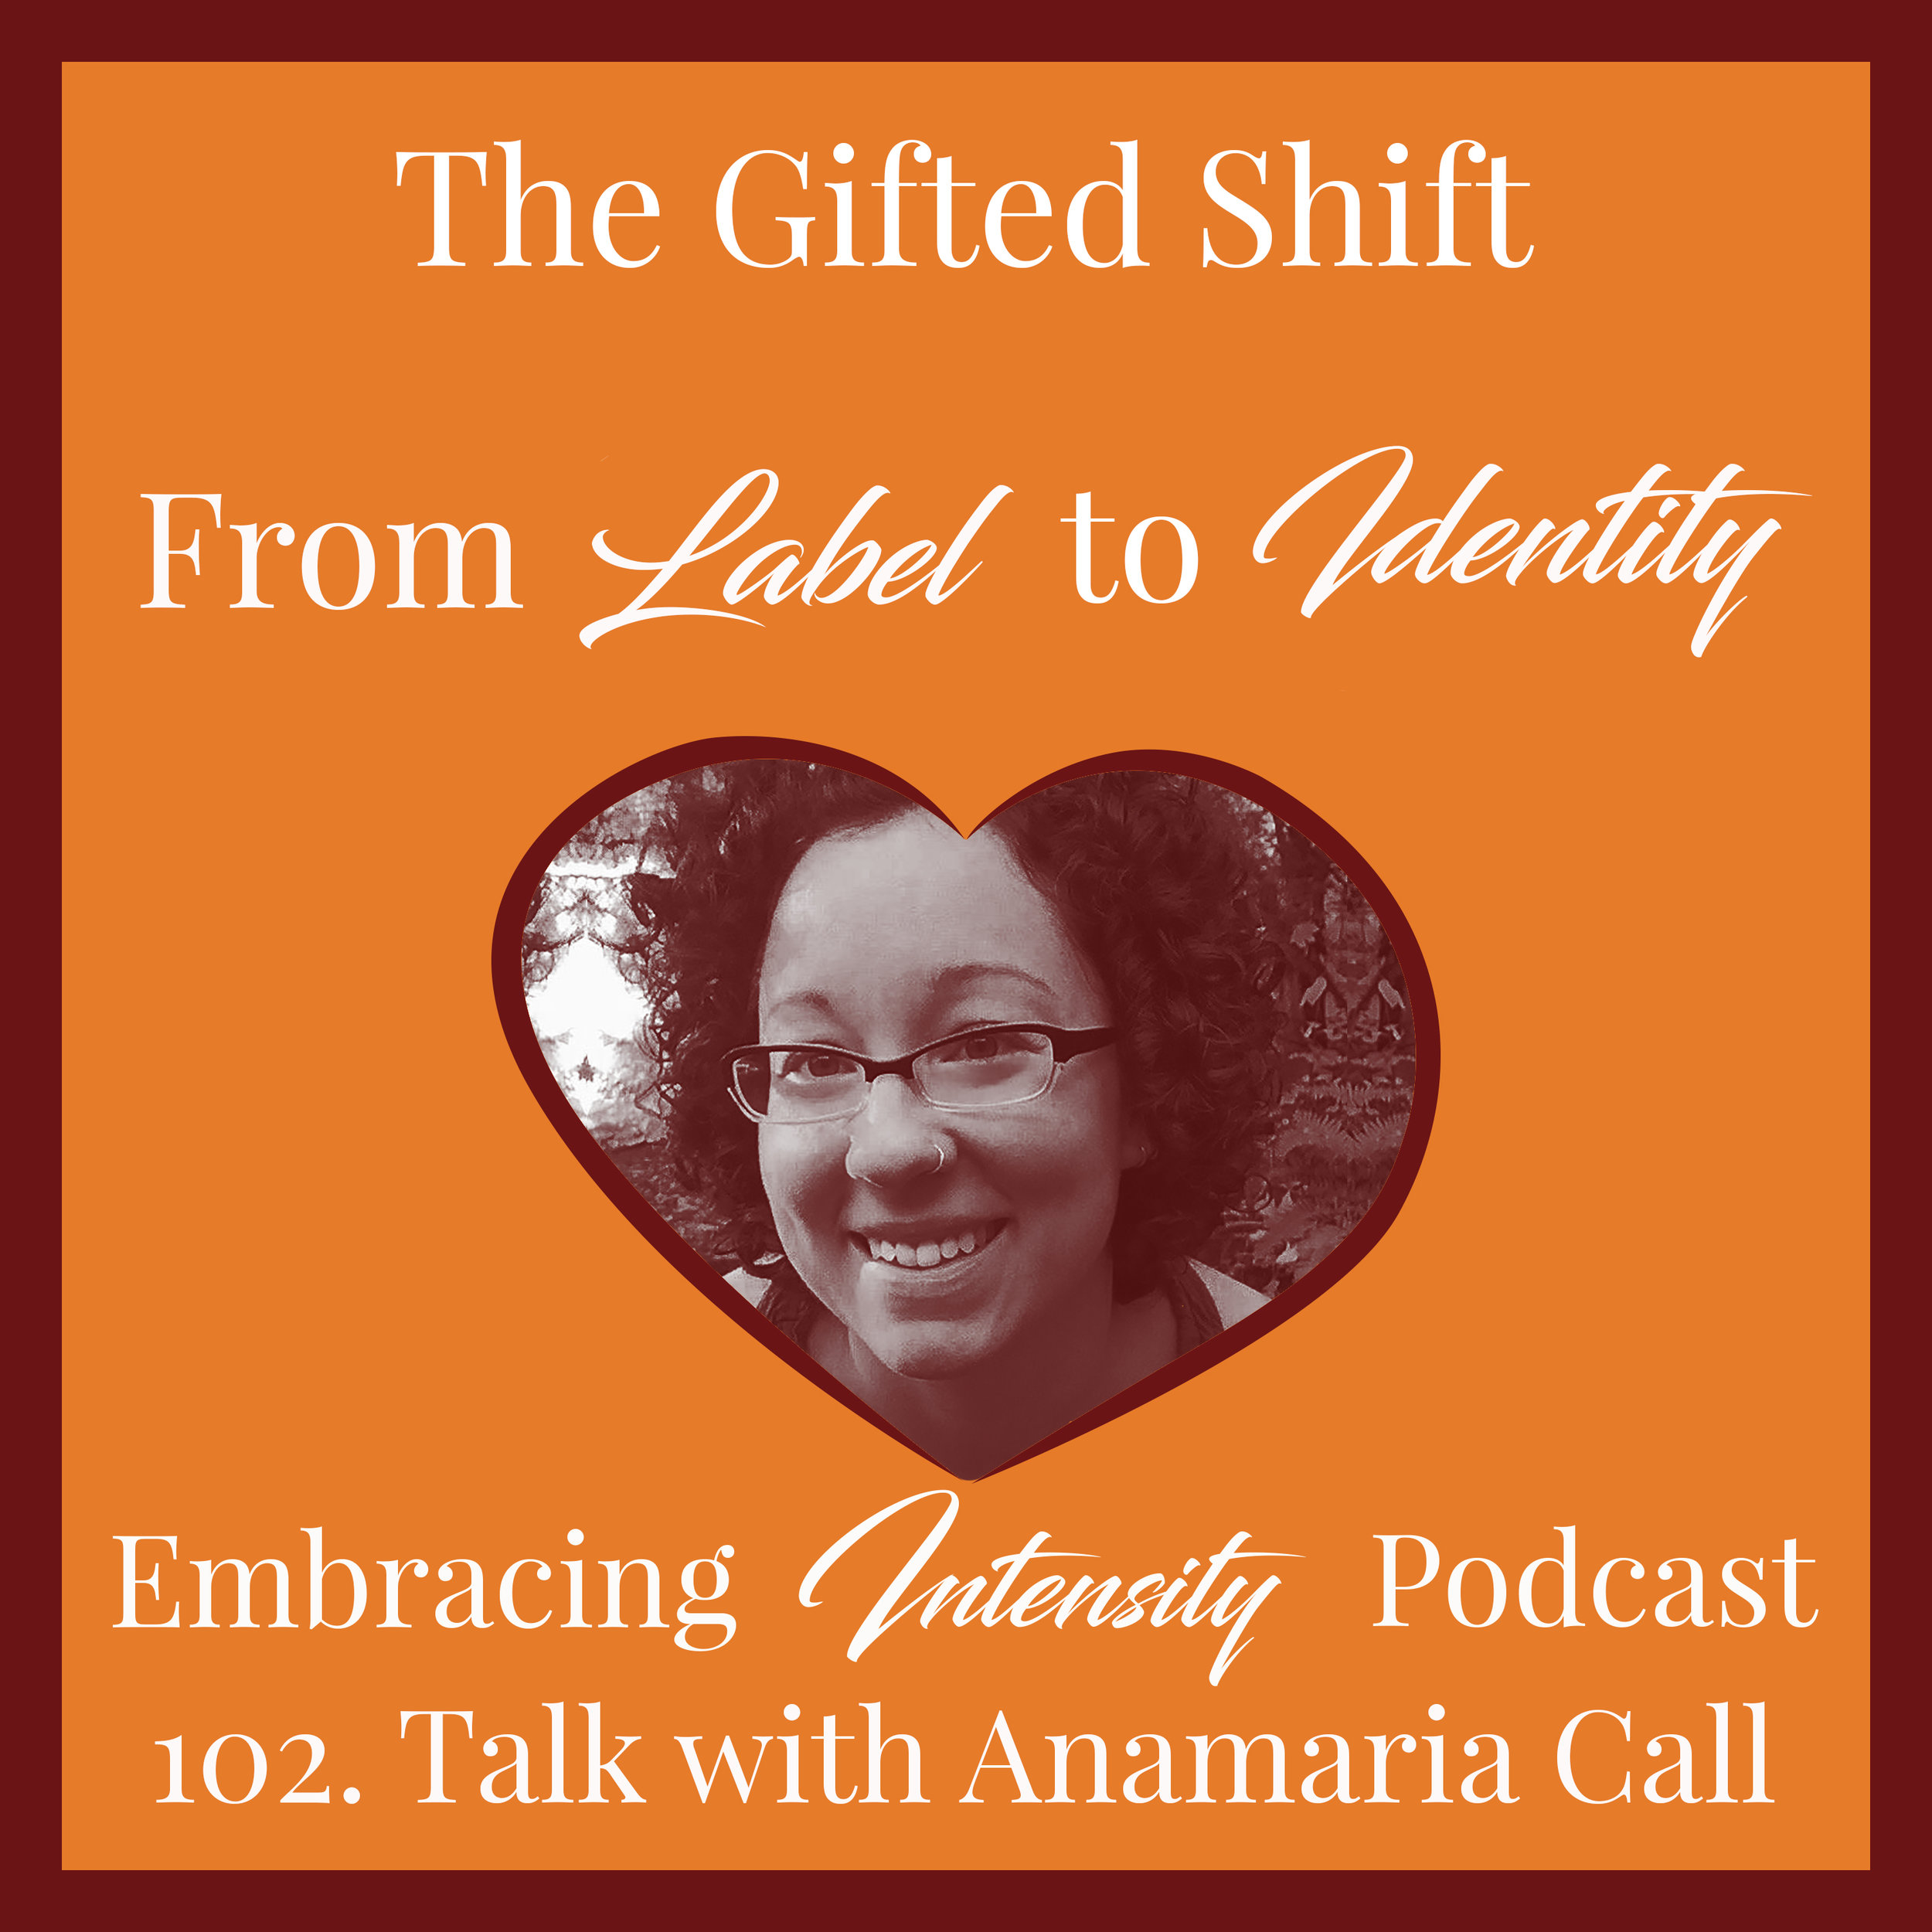 The Gifted Shift: From Identity to Label